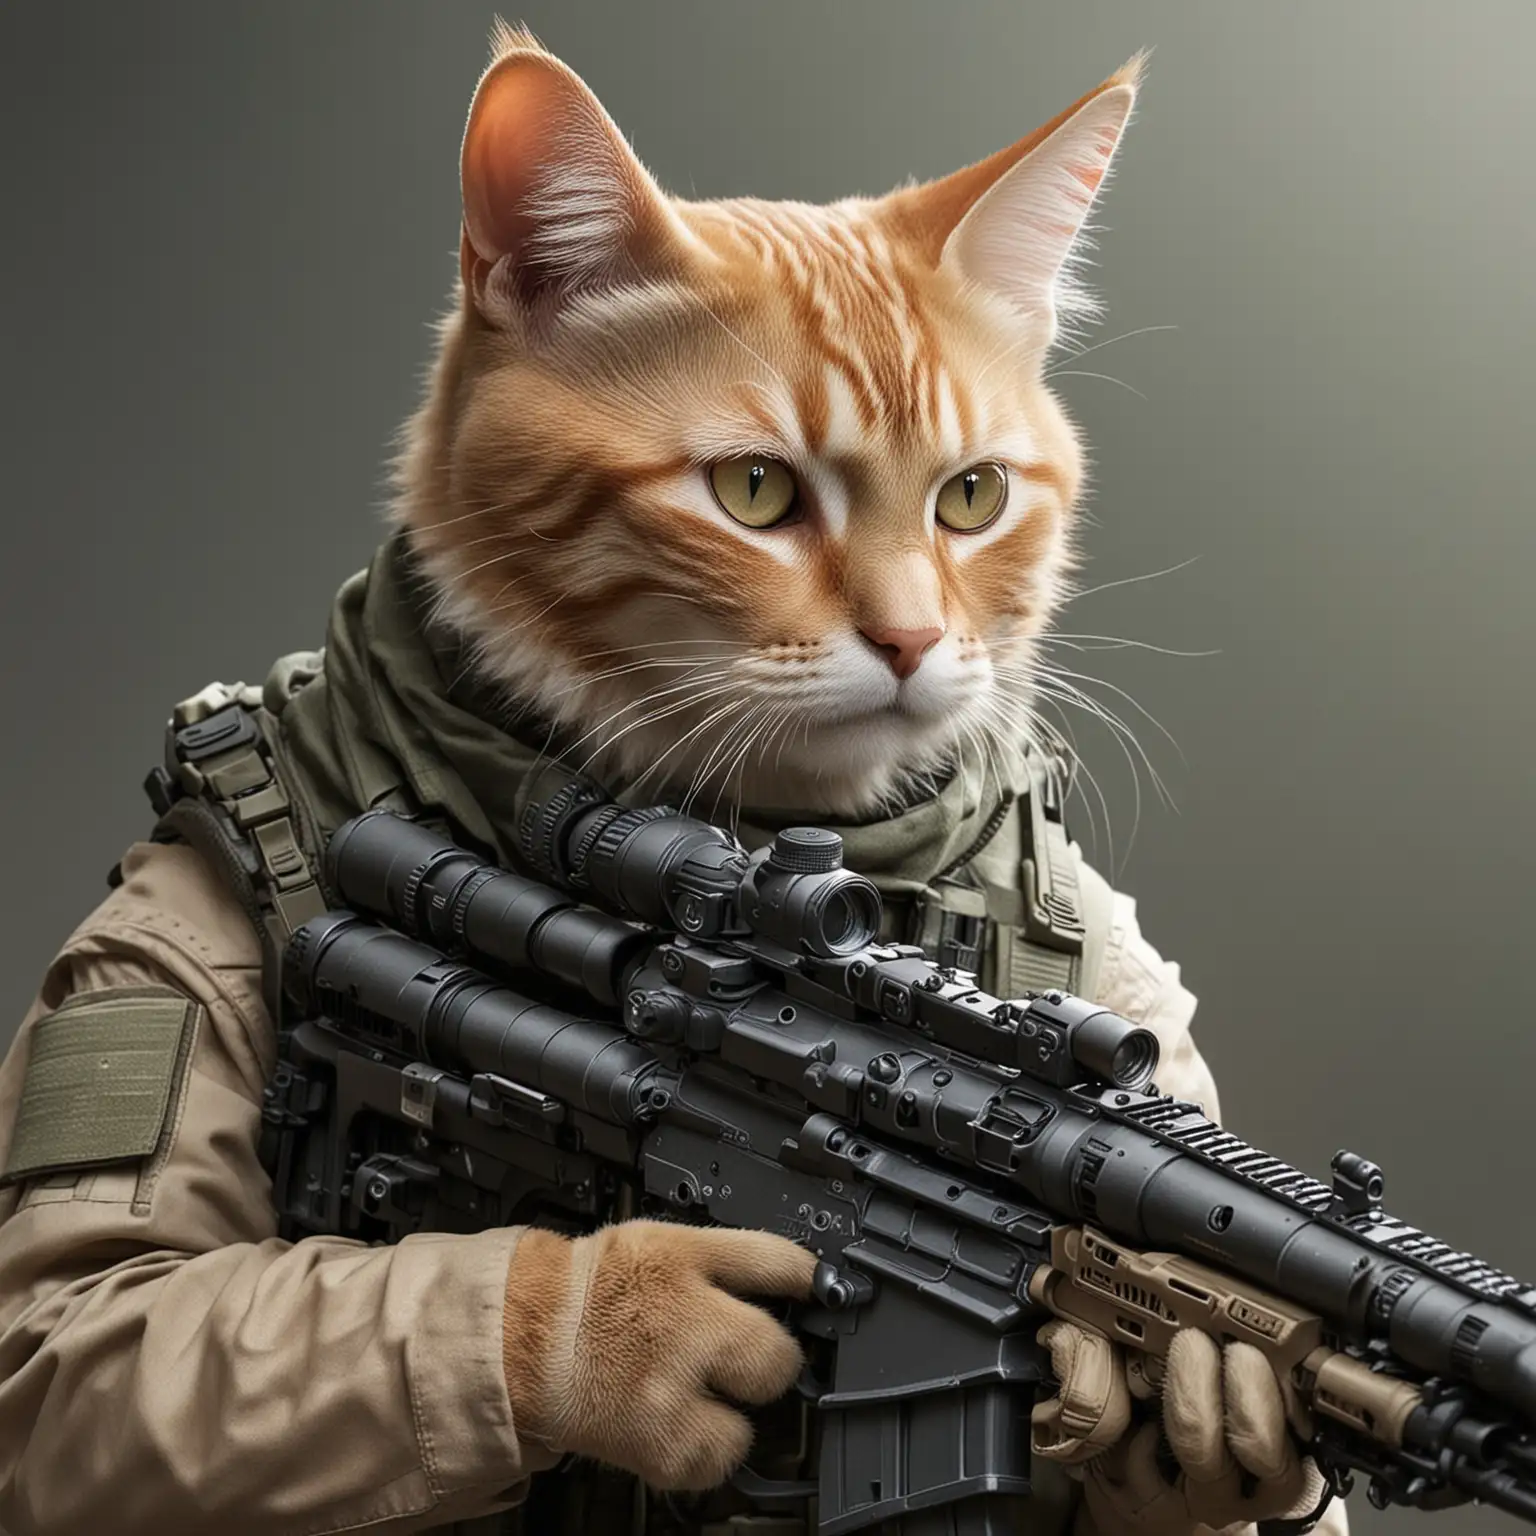 humanoid cat as a sniper